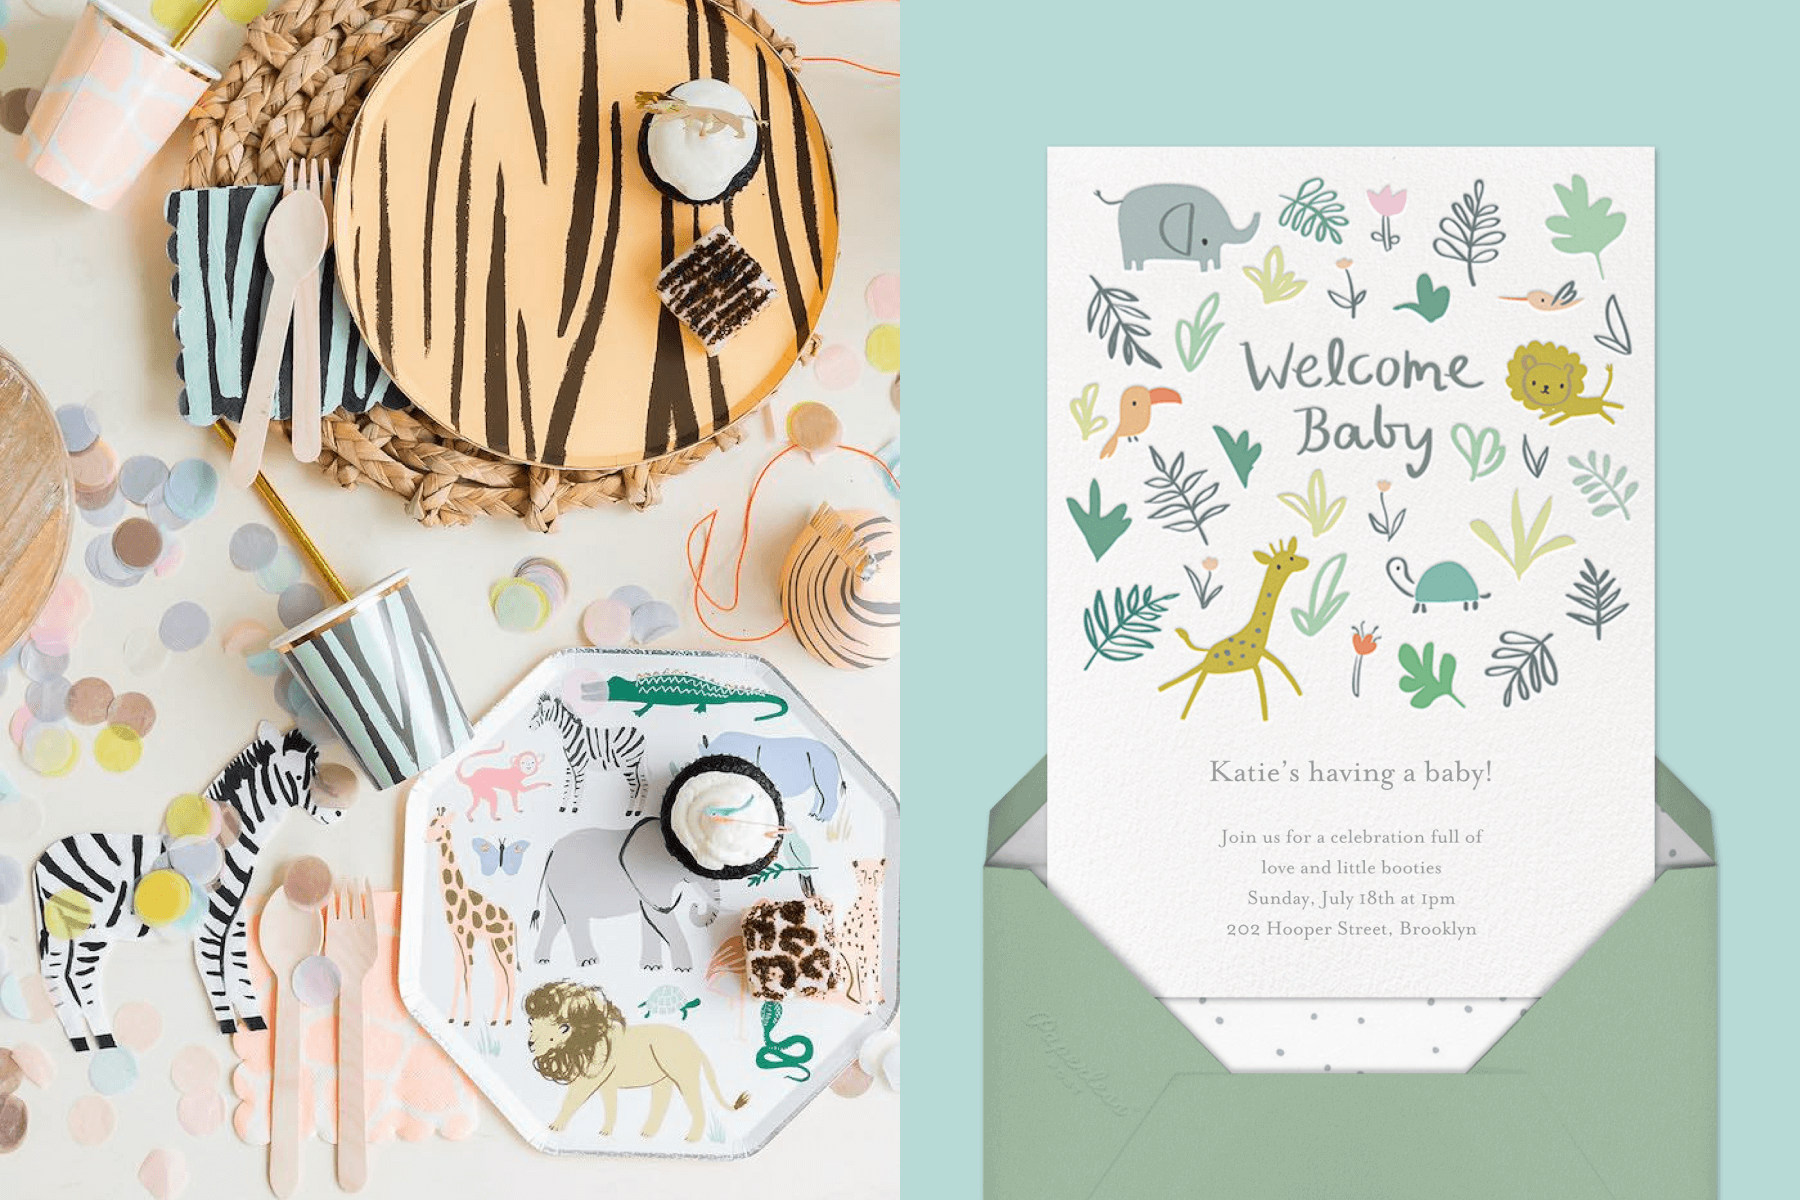 left: Safari animal-themed party goods. Right: A baby shower invitation with illustrations of baby animals.